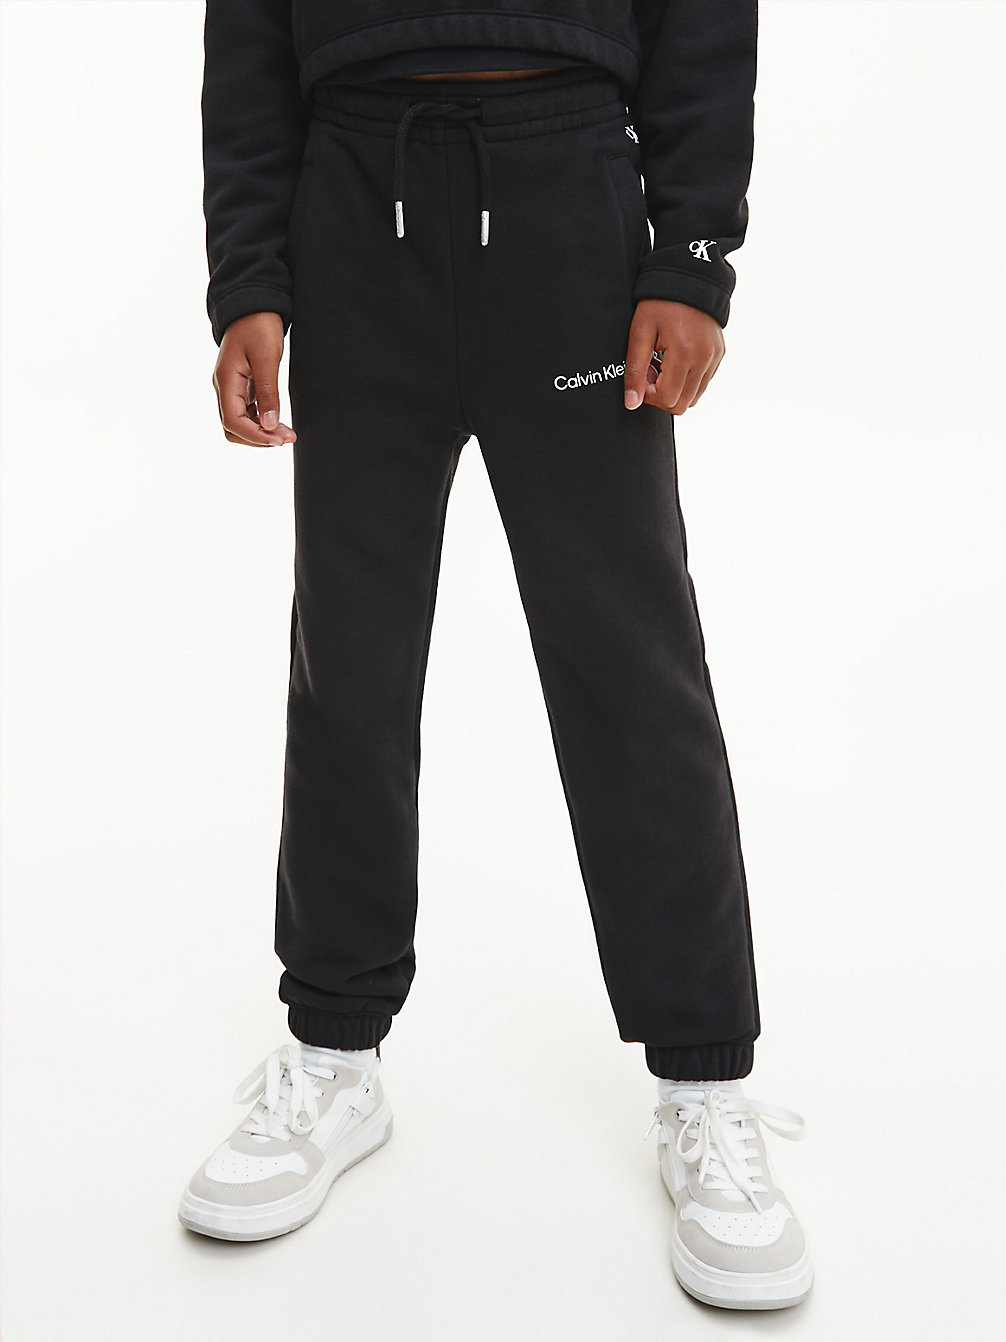 CK BLACK High Rise Relaxed Joggers undefined girls Calvin Klein